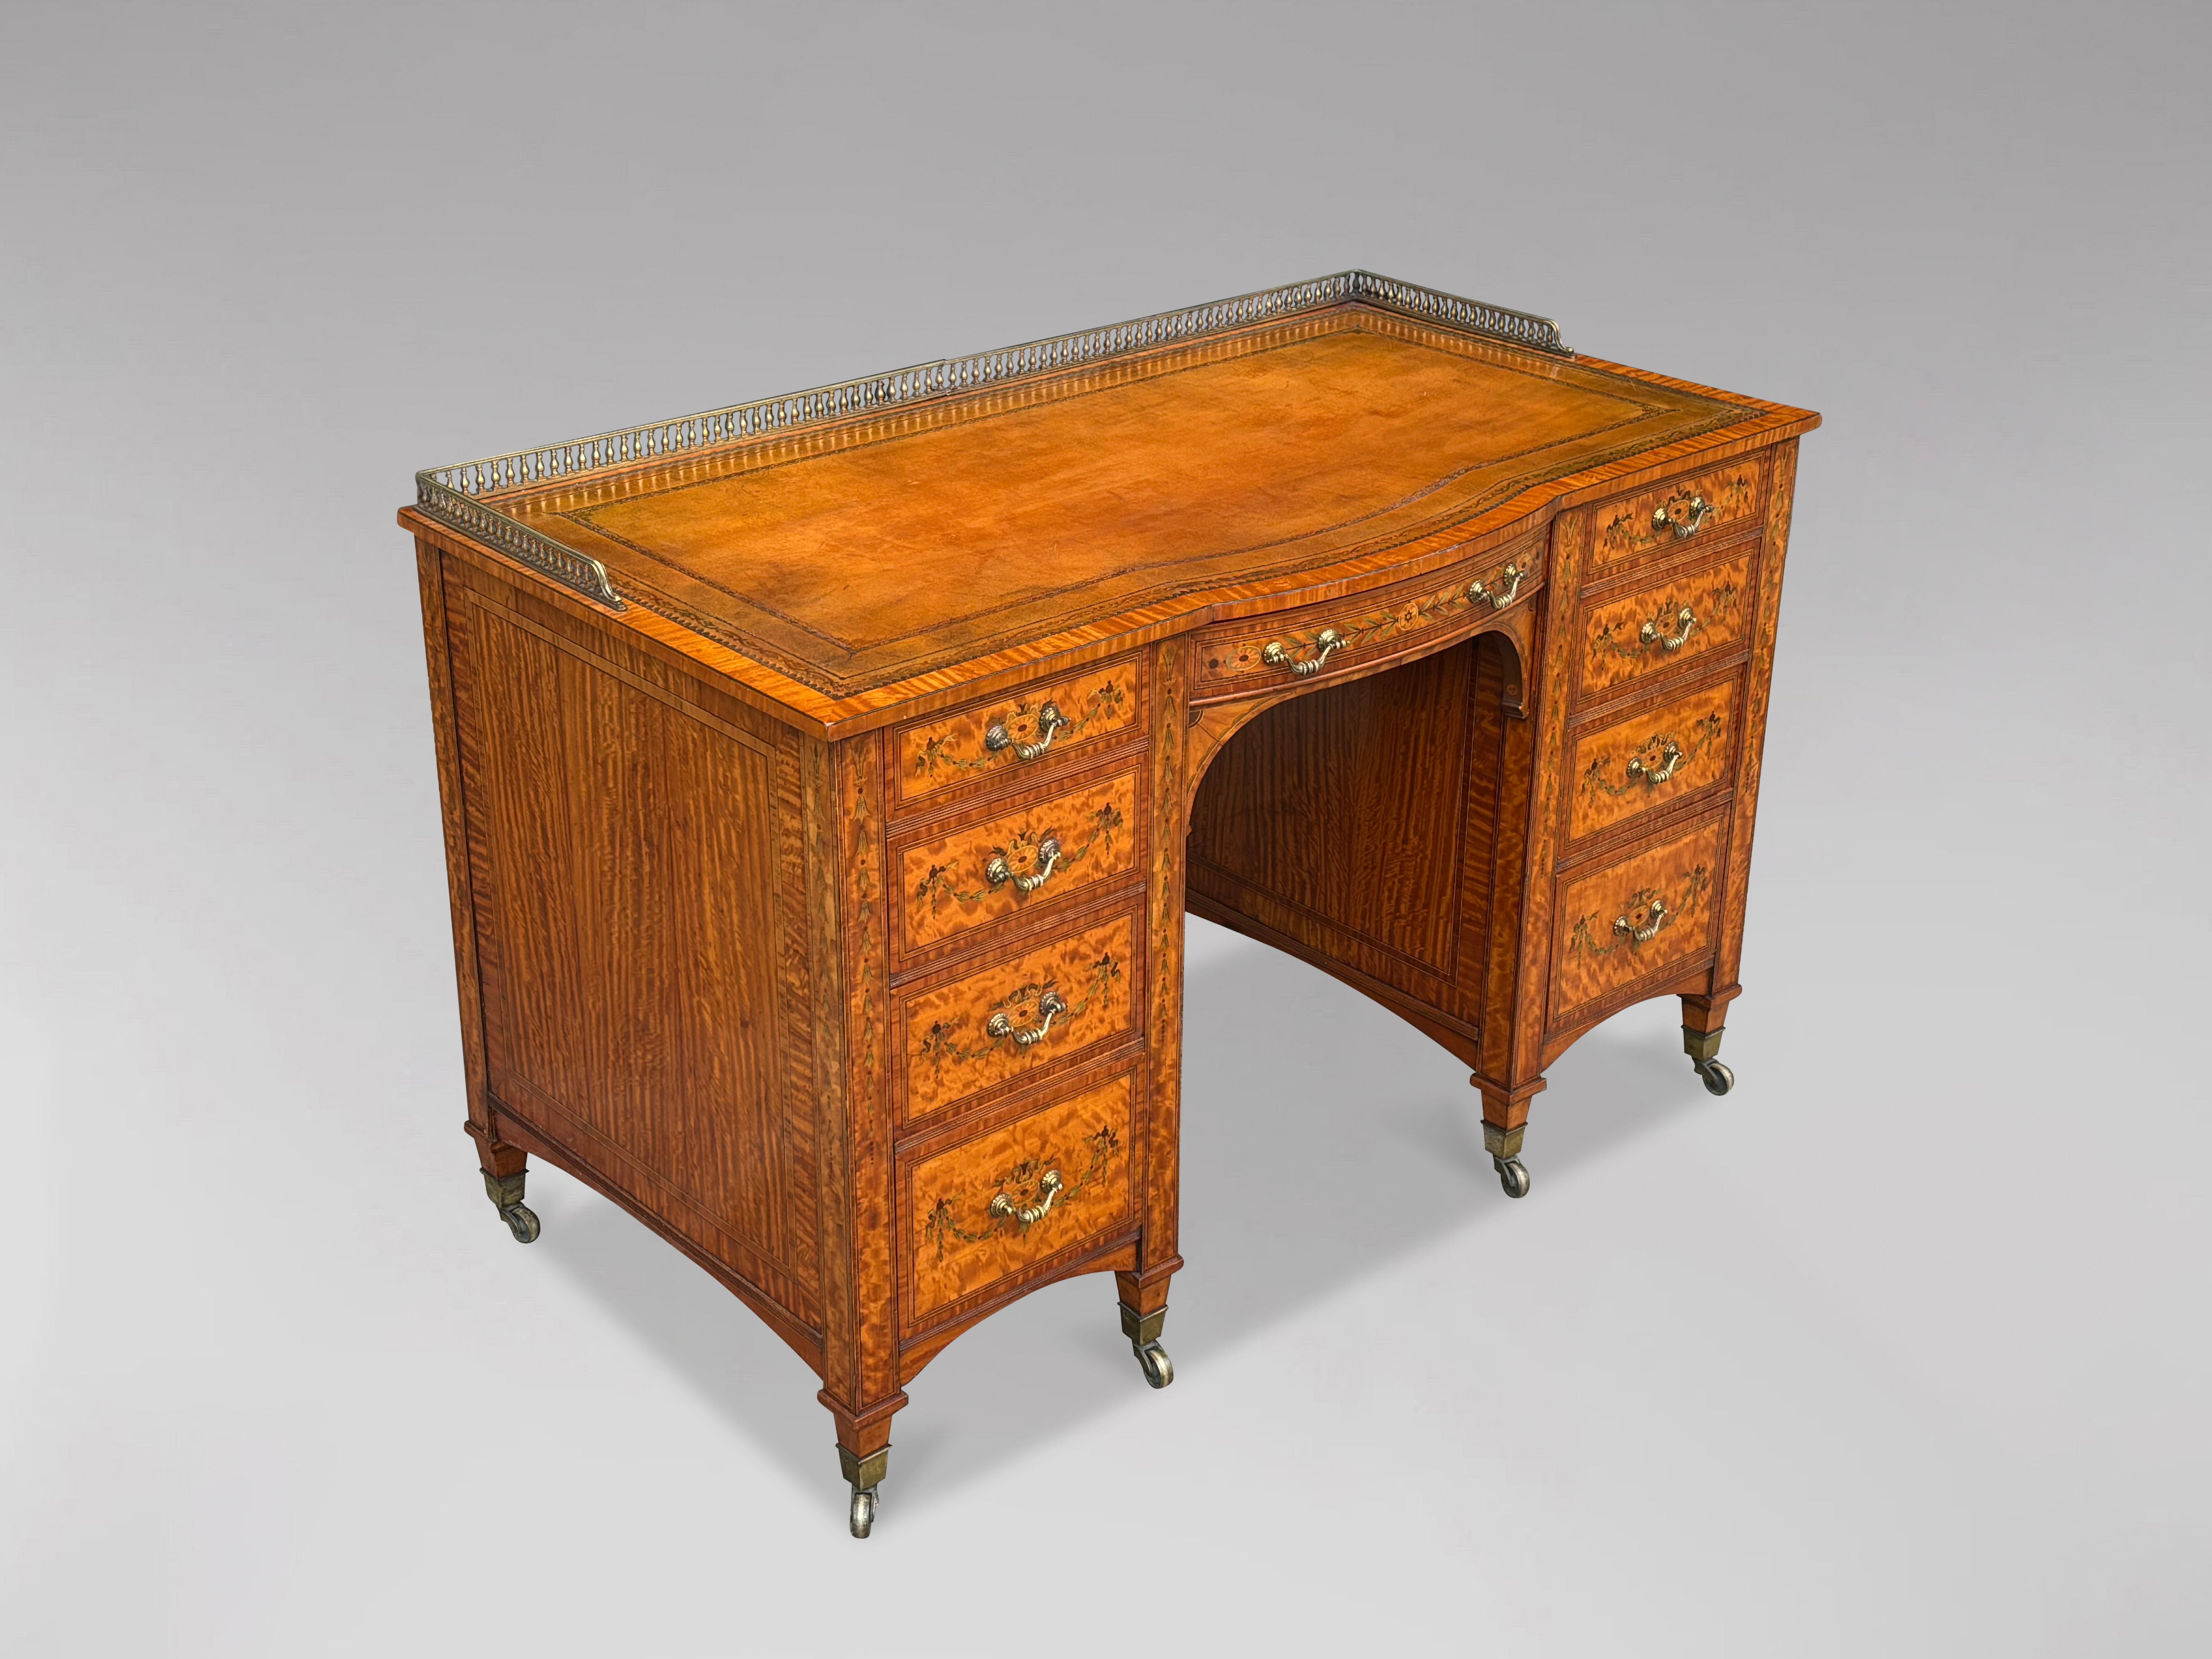 A fine quality mid 19th Century well-figured satinwood and marquetry pedestal desk. Marquetry boxwood, rosewood & ebony line inlaid and satinwood throughout, having brass galleried top, shaped green tooled leather writing surface. The desk, finished